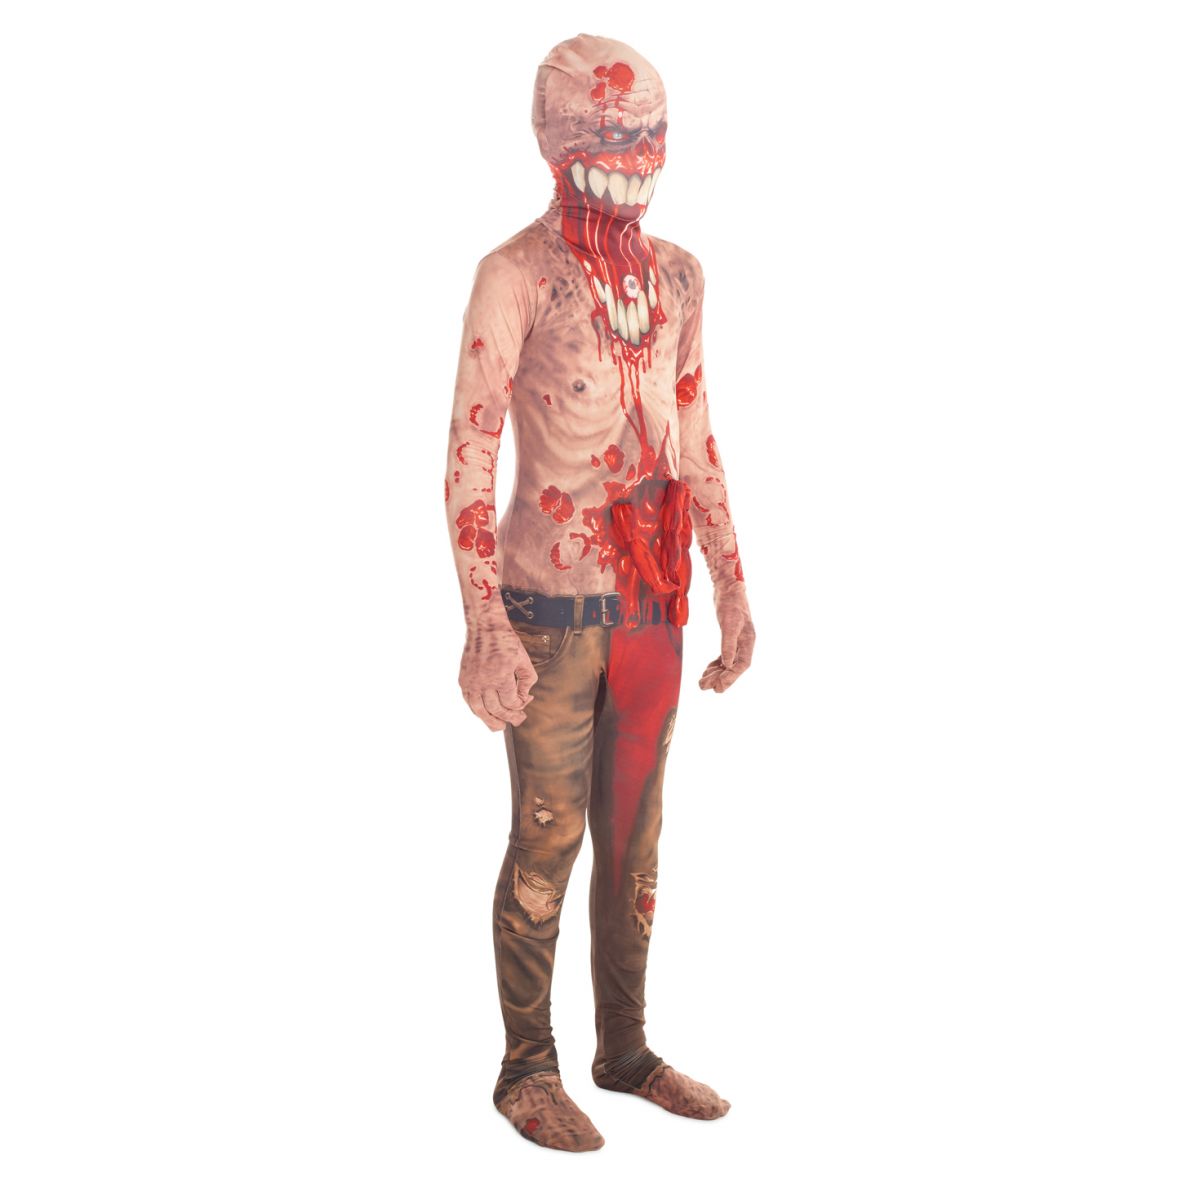 Exploding Guts Zombie Morphsuit outfit Kids